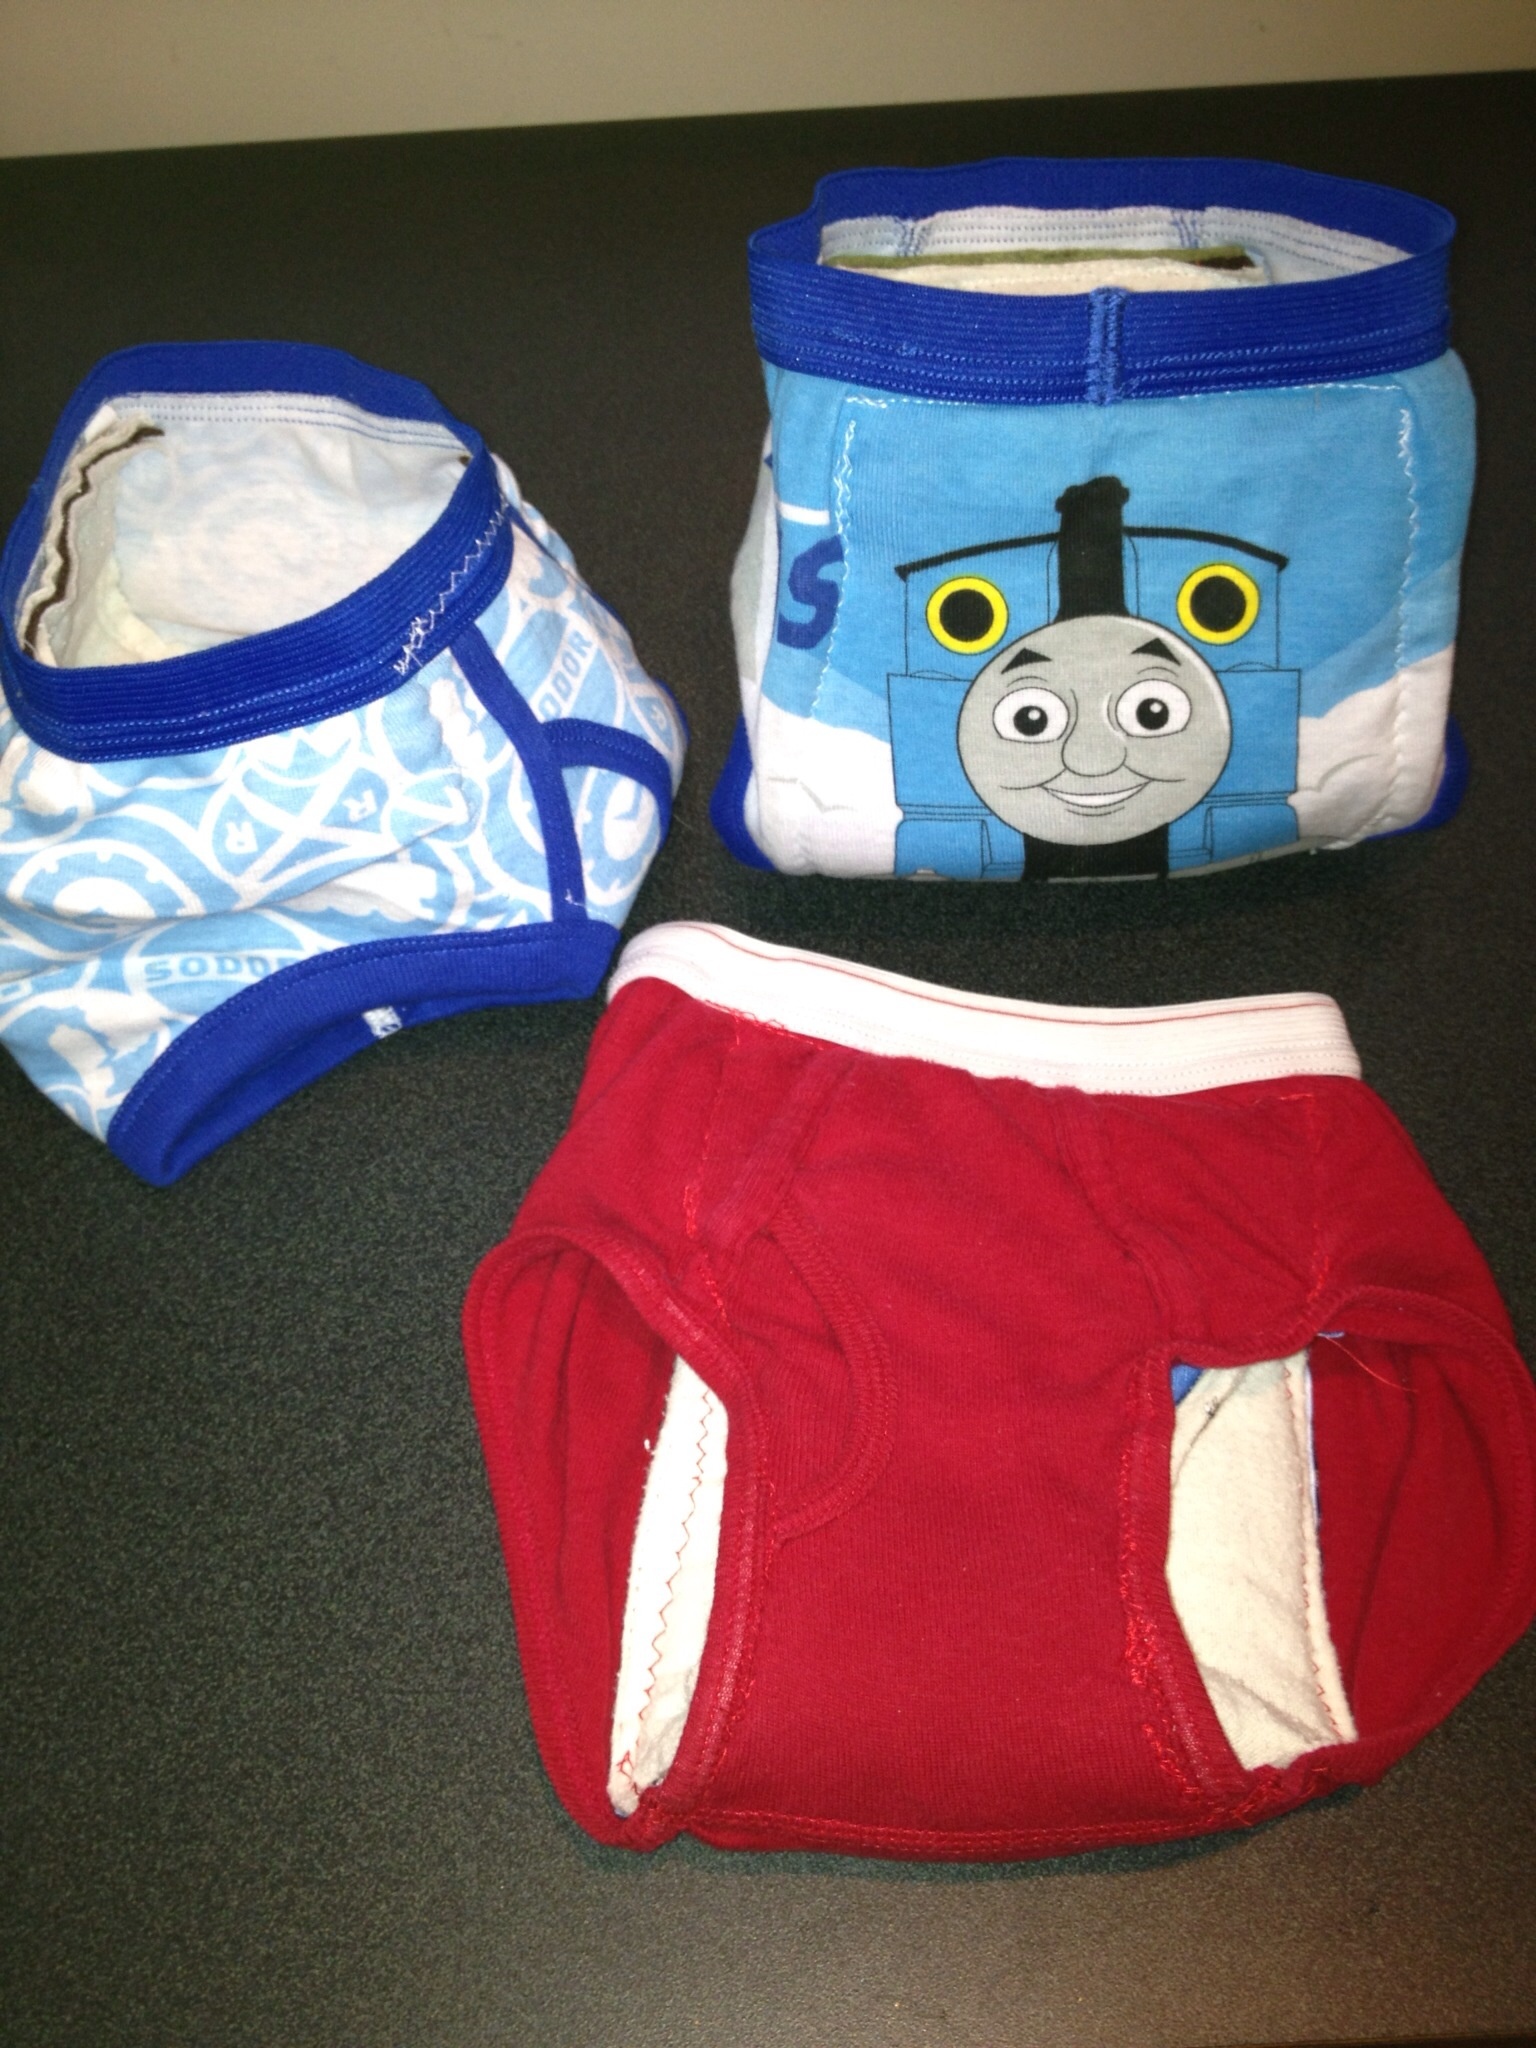 How to sew DIY baby or toddler underwear –